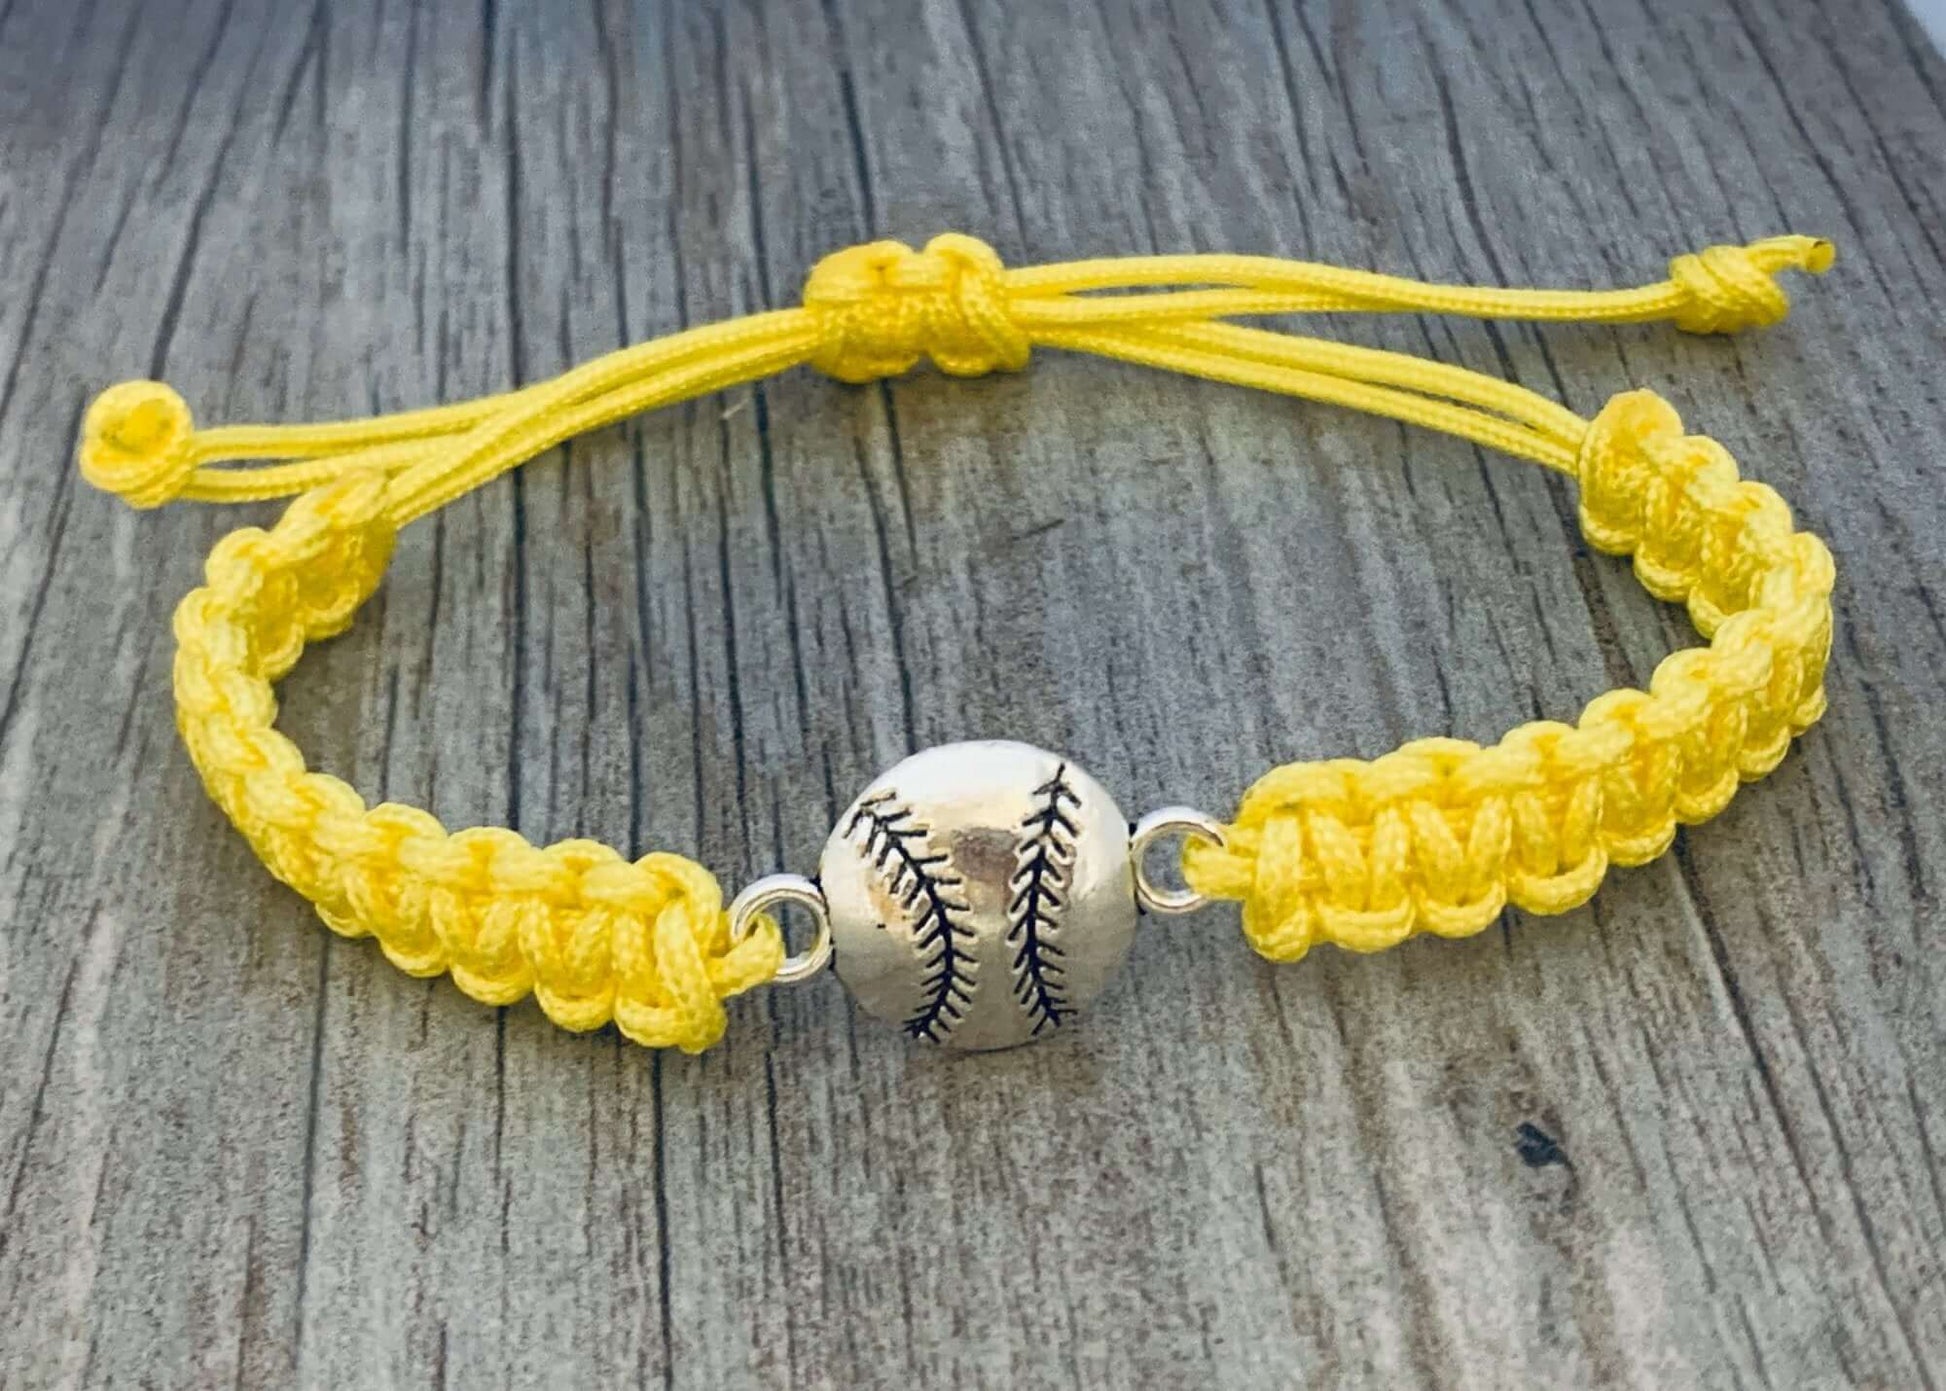 Baseball Rope Bracelet in Yellow Color